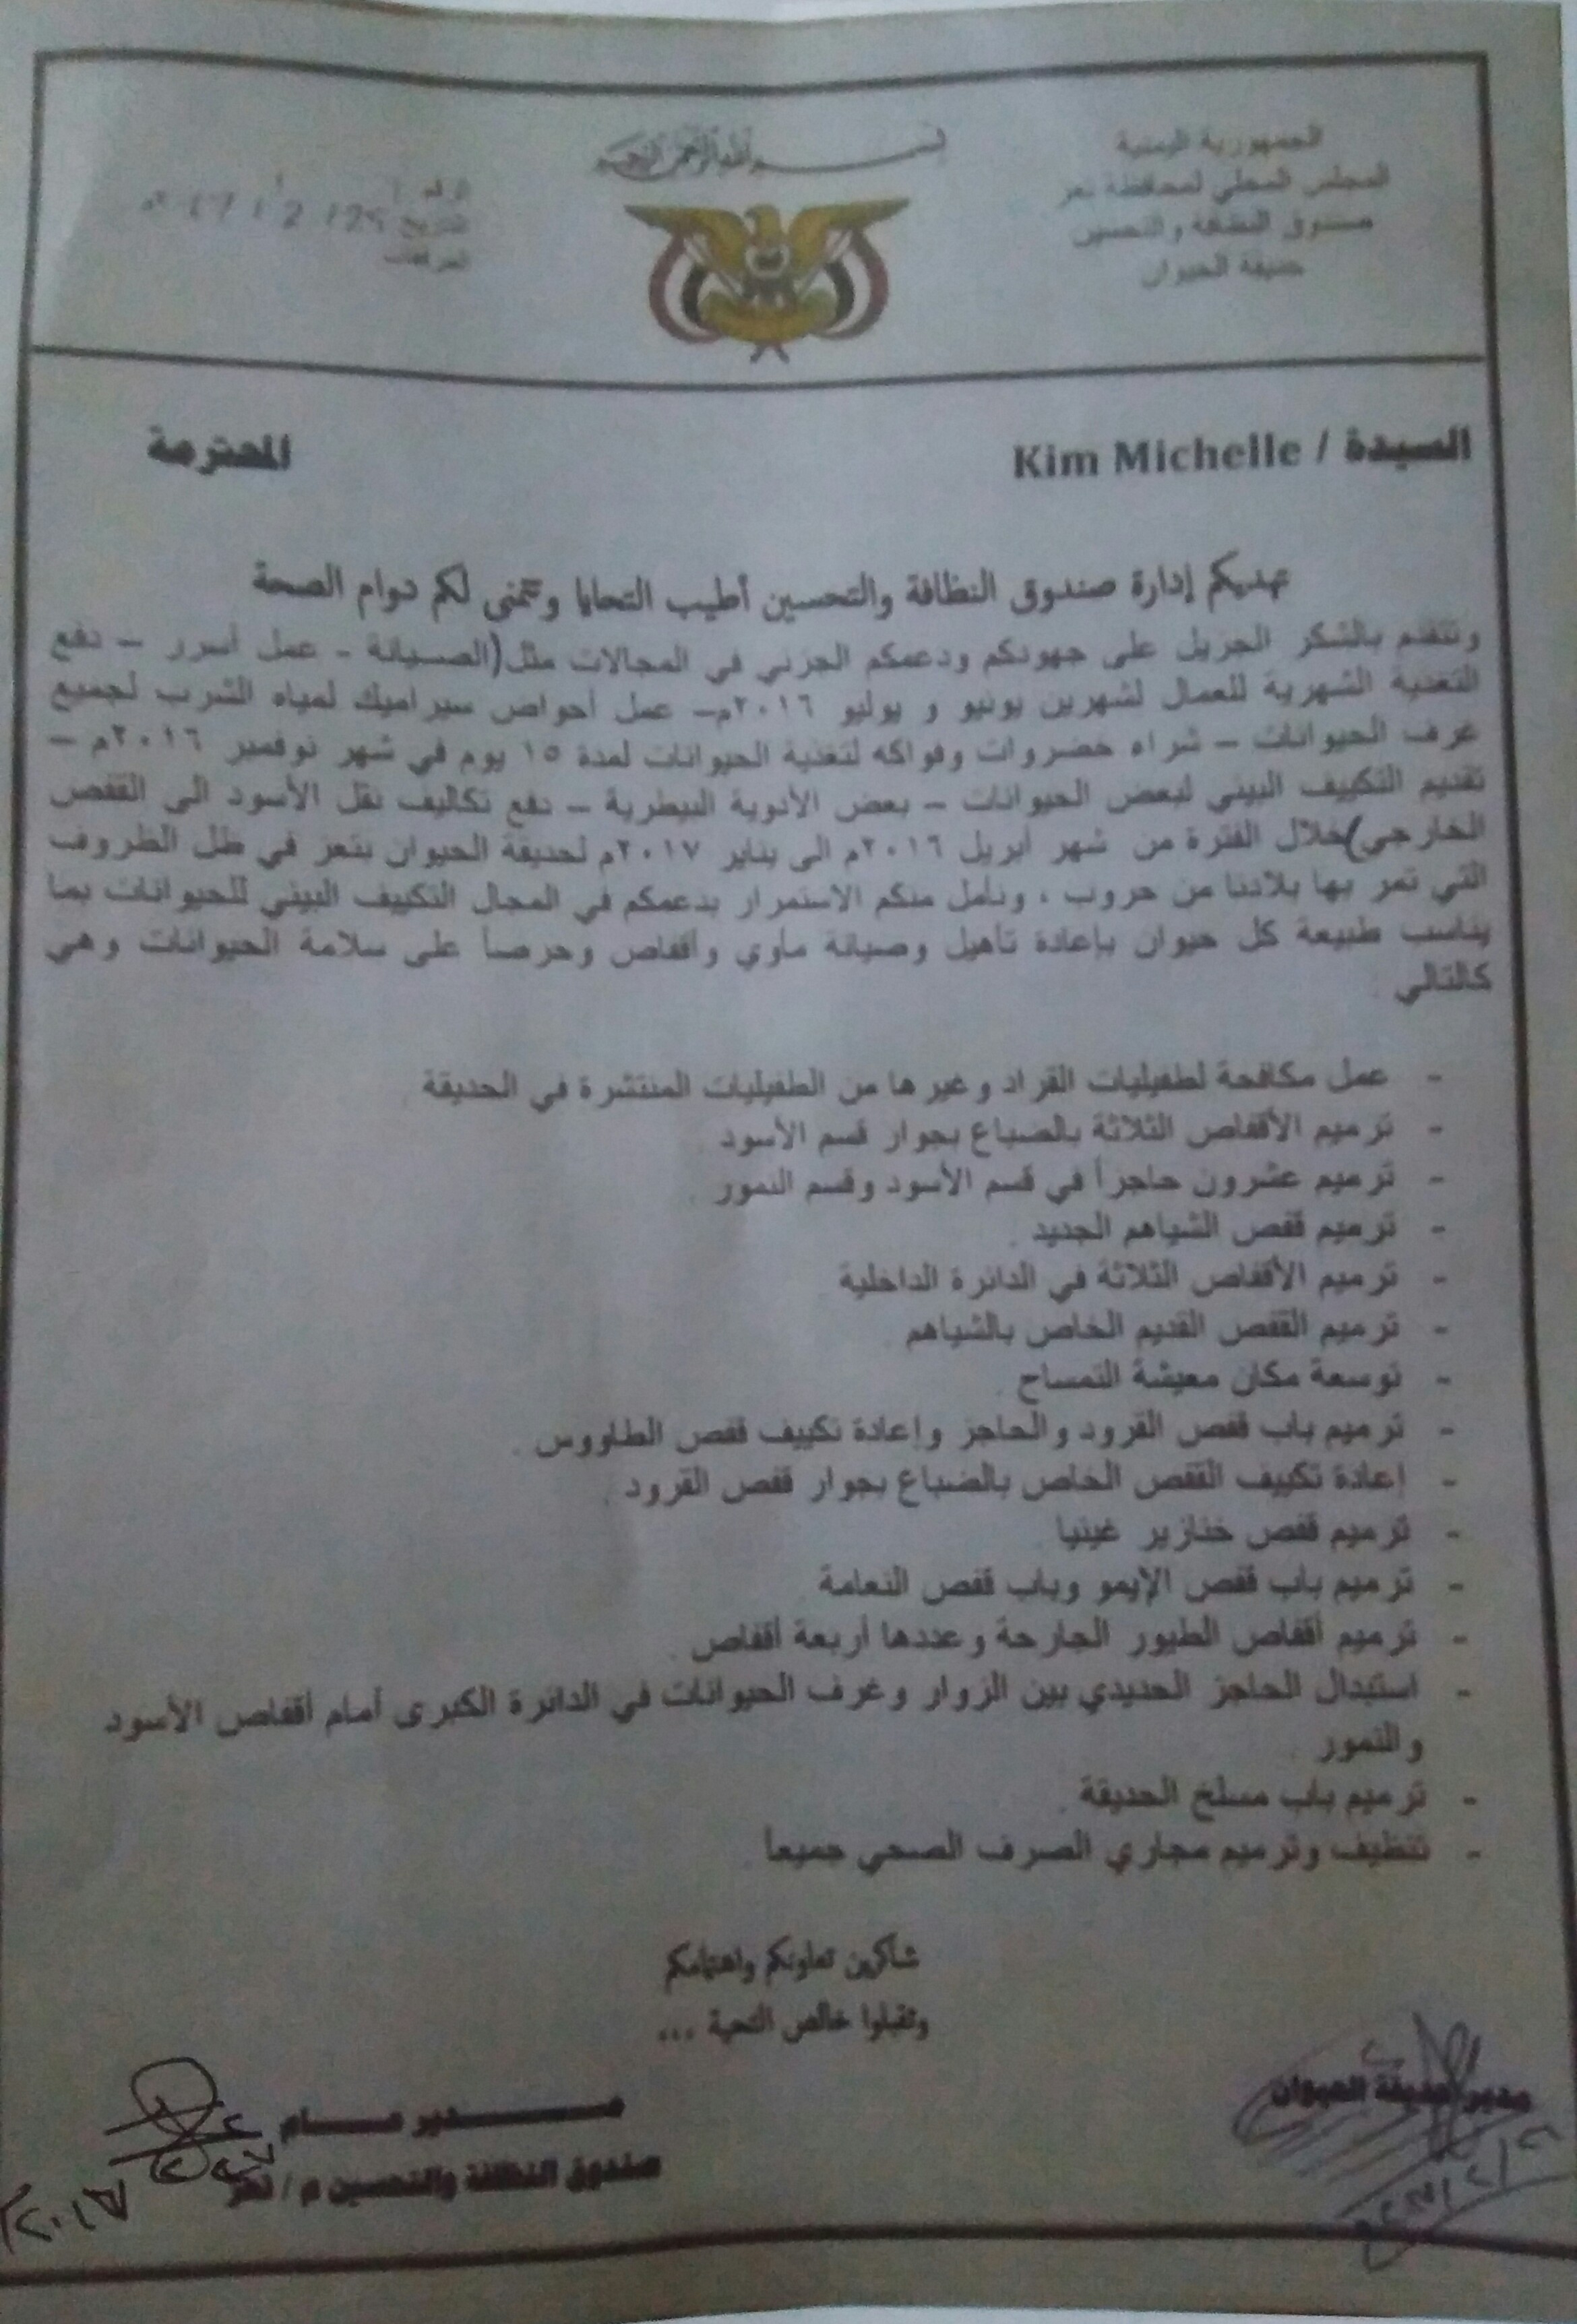 letter of thanks from Mr Ghazi to Kim Michelle for help Taiz Zoo.jpg